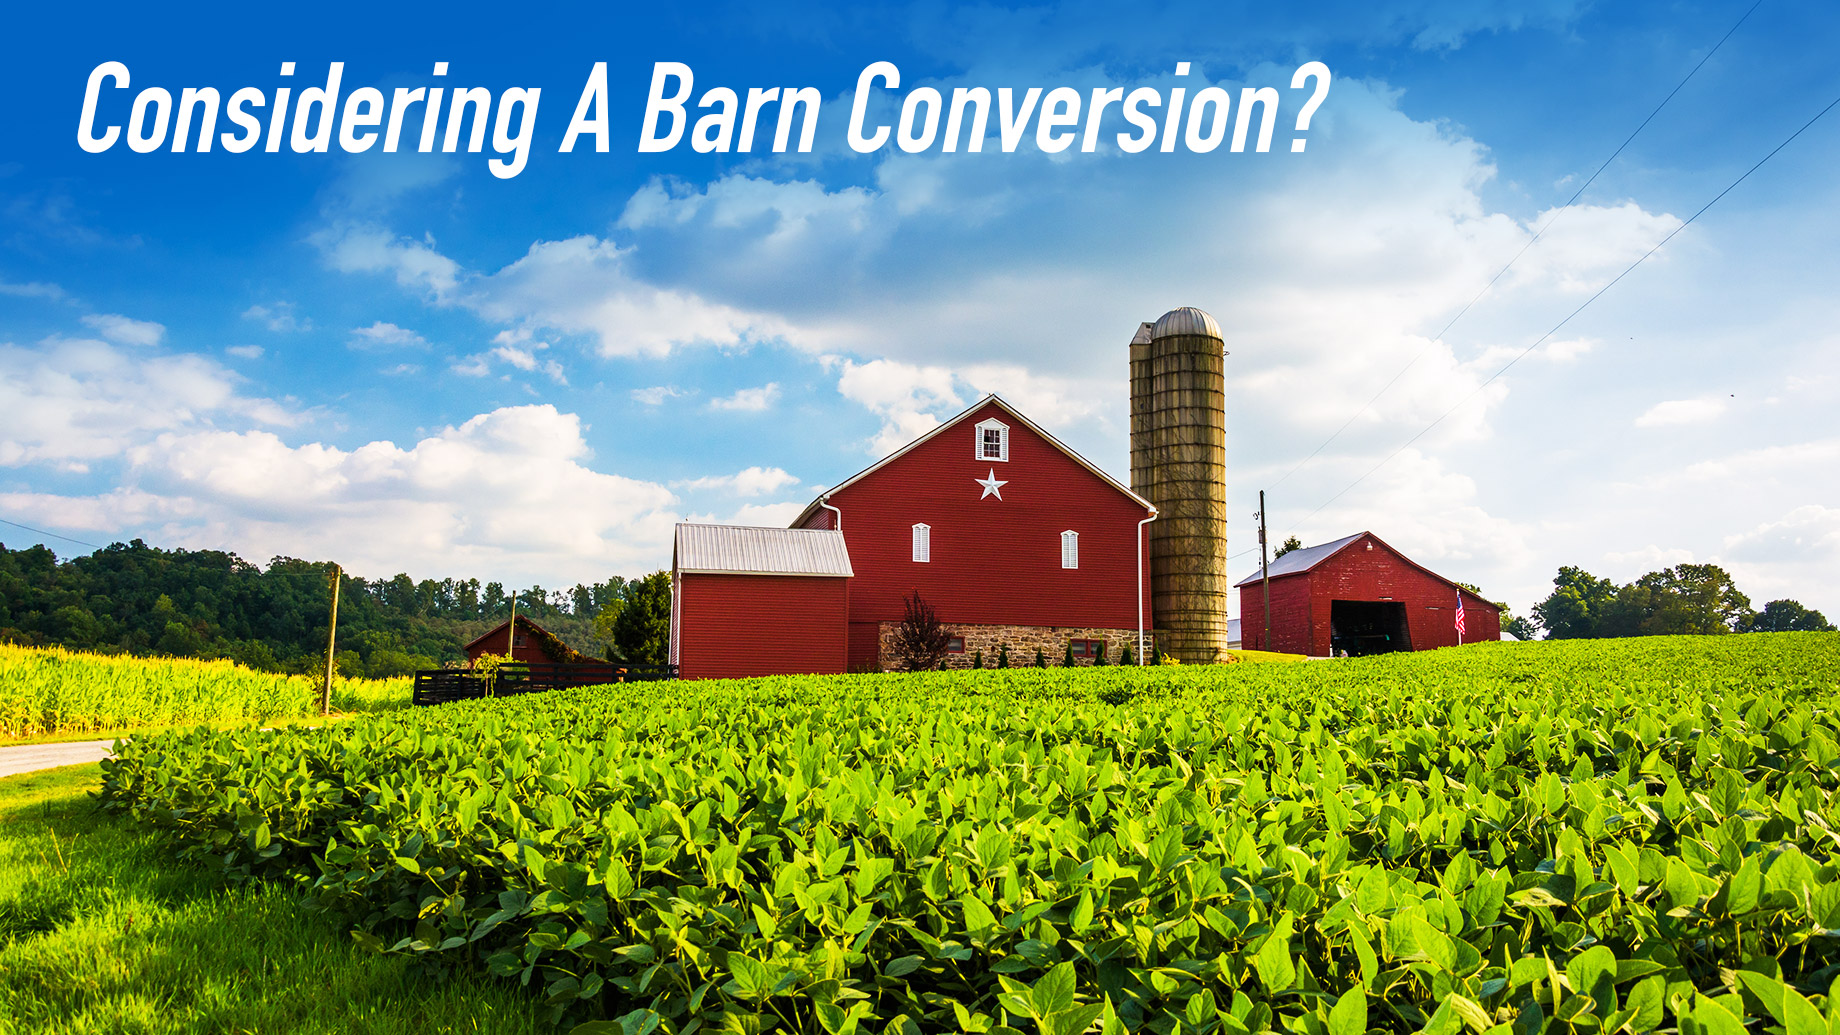 Considering A Barn Conversion? Here's What You Need To Know